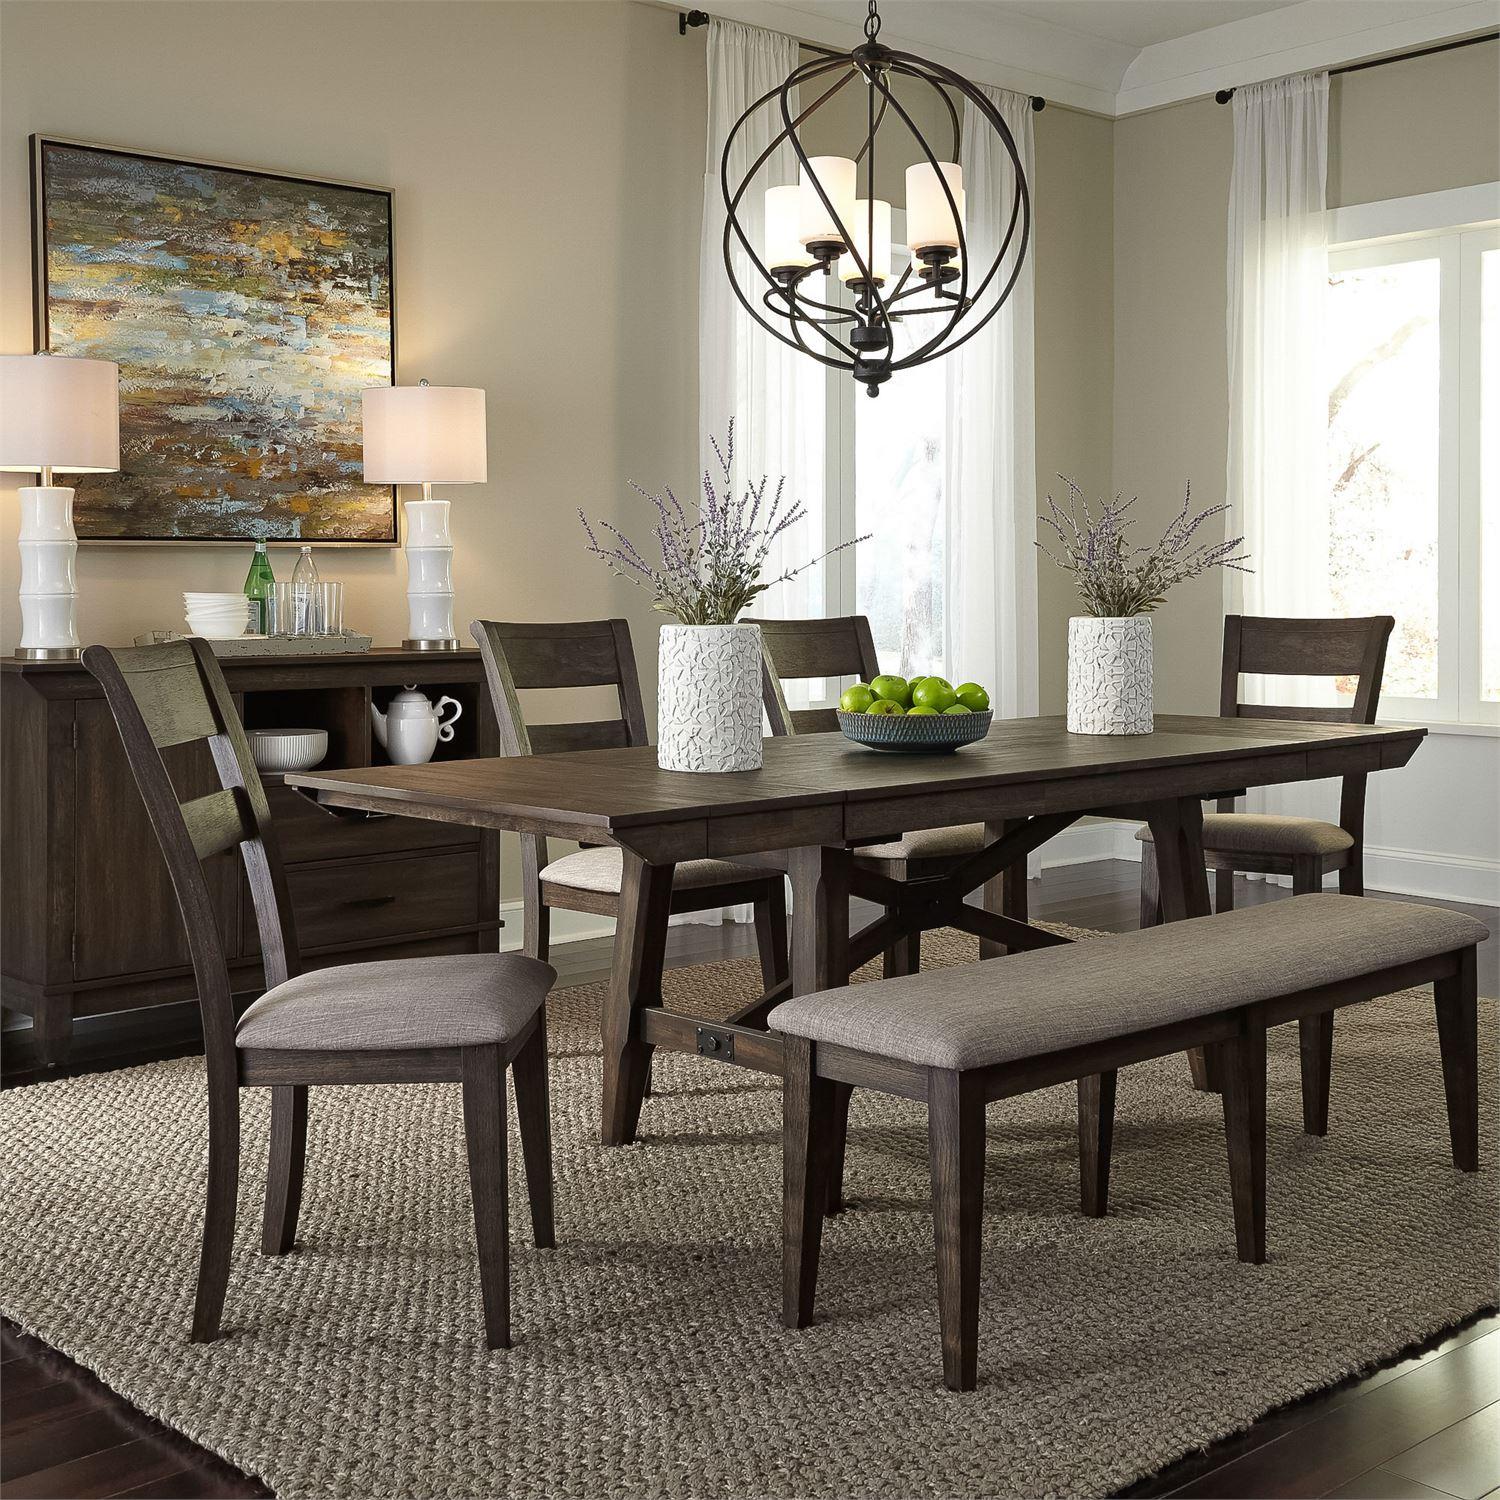 Rustic Dining Room Set Double Bridge  (152-CD) Dining Room Set 152-CD-6TRS in Chestnut Fabric